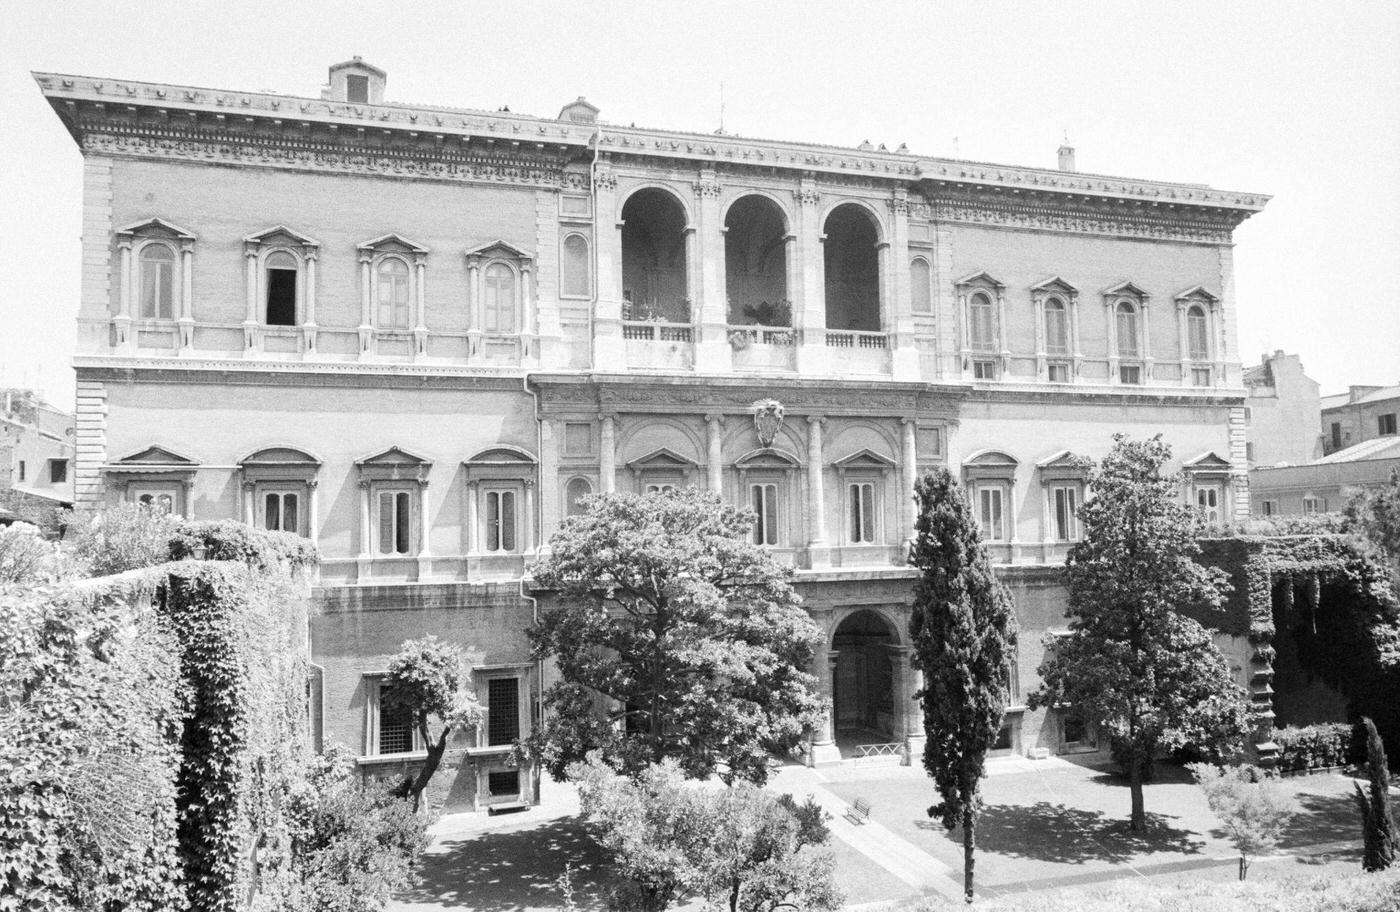 Palazzo Farnese, French Embassy in Rome, 1988